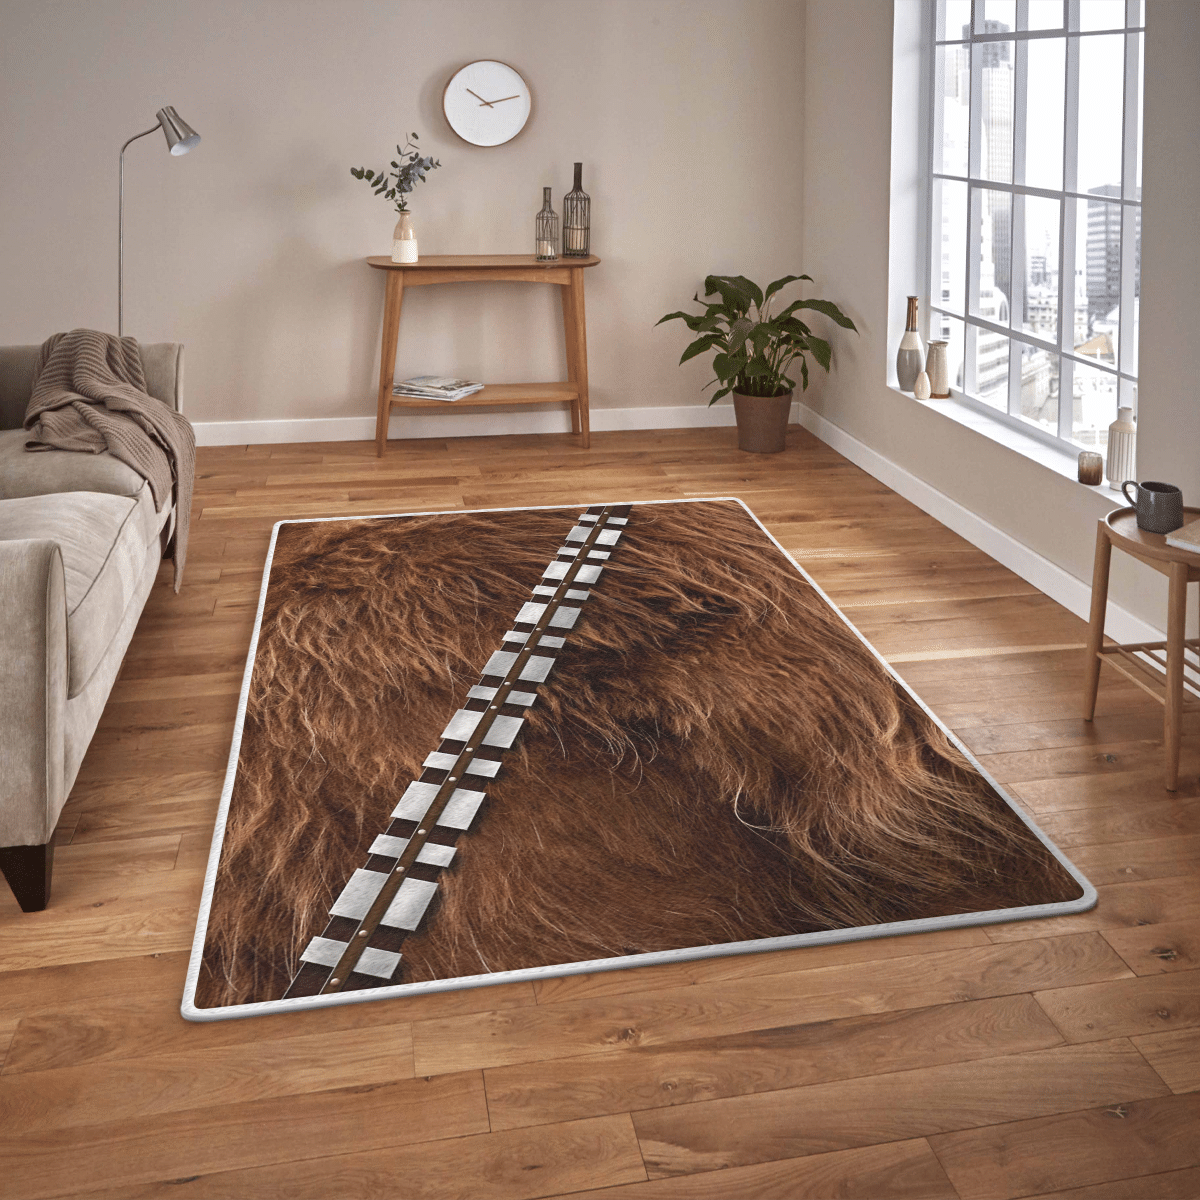 HOT Star Wars Chewbacca’s bandolier rectangle rug1